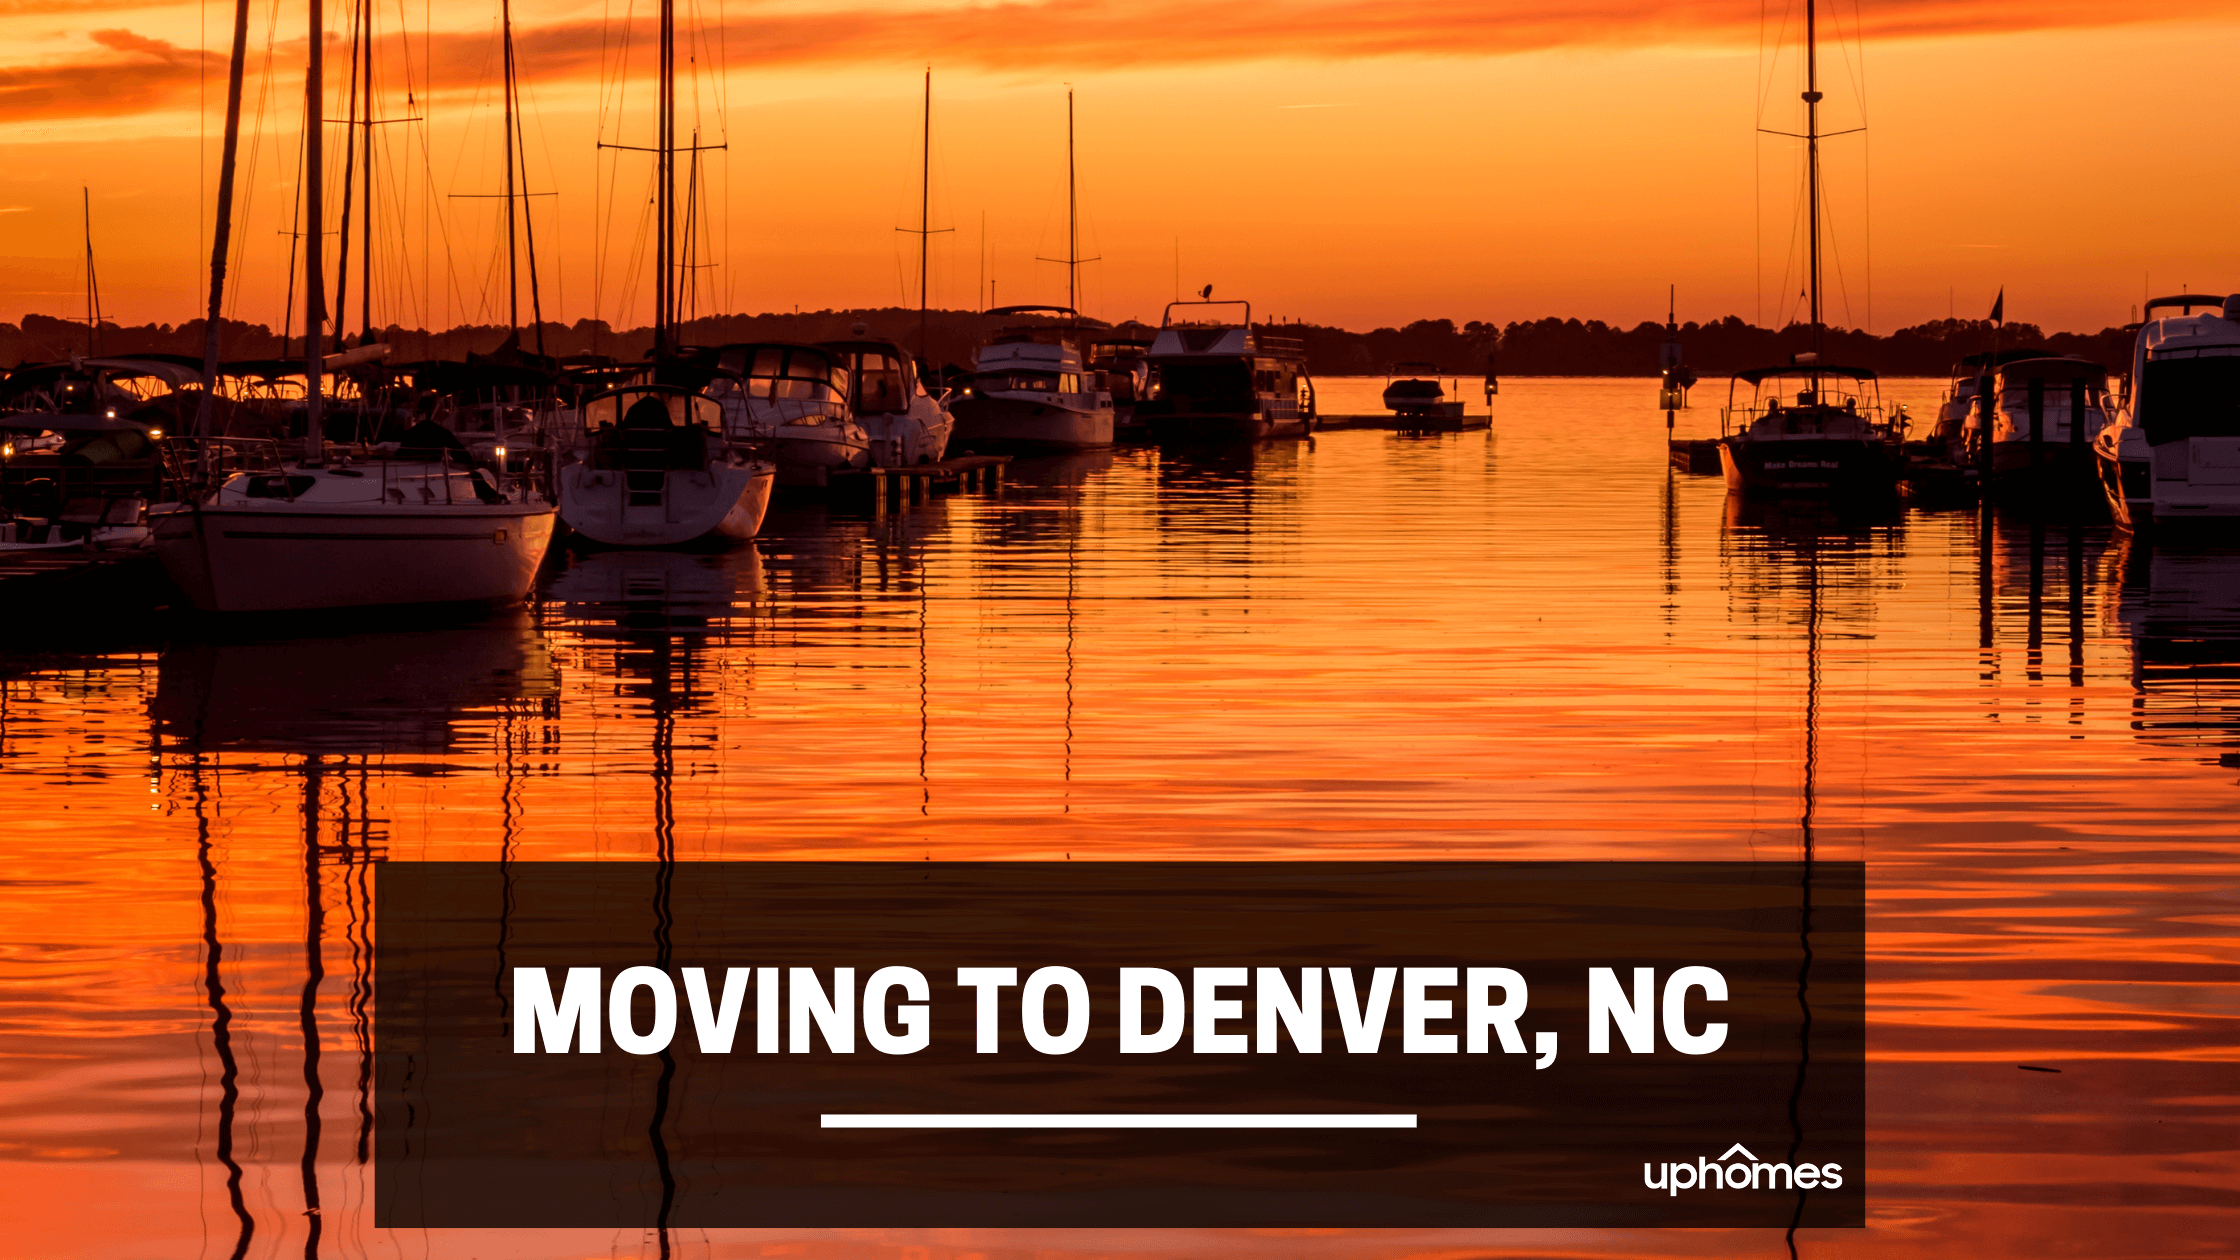 Moving to Denver, NC - What is it like Living in Denver, NC?